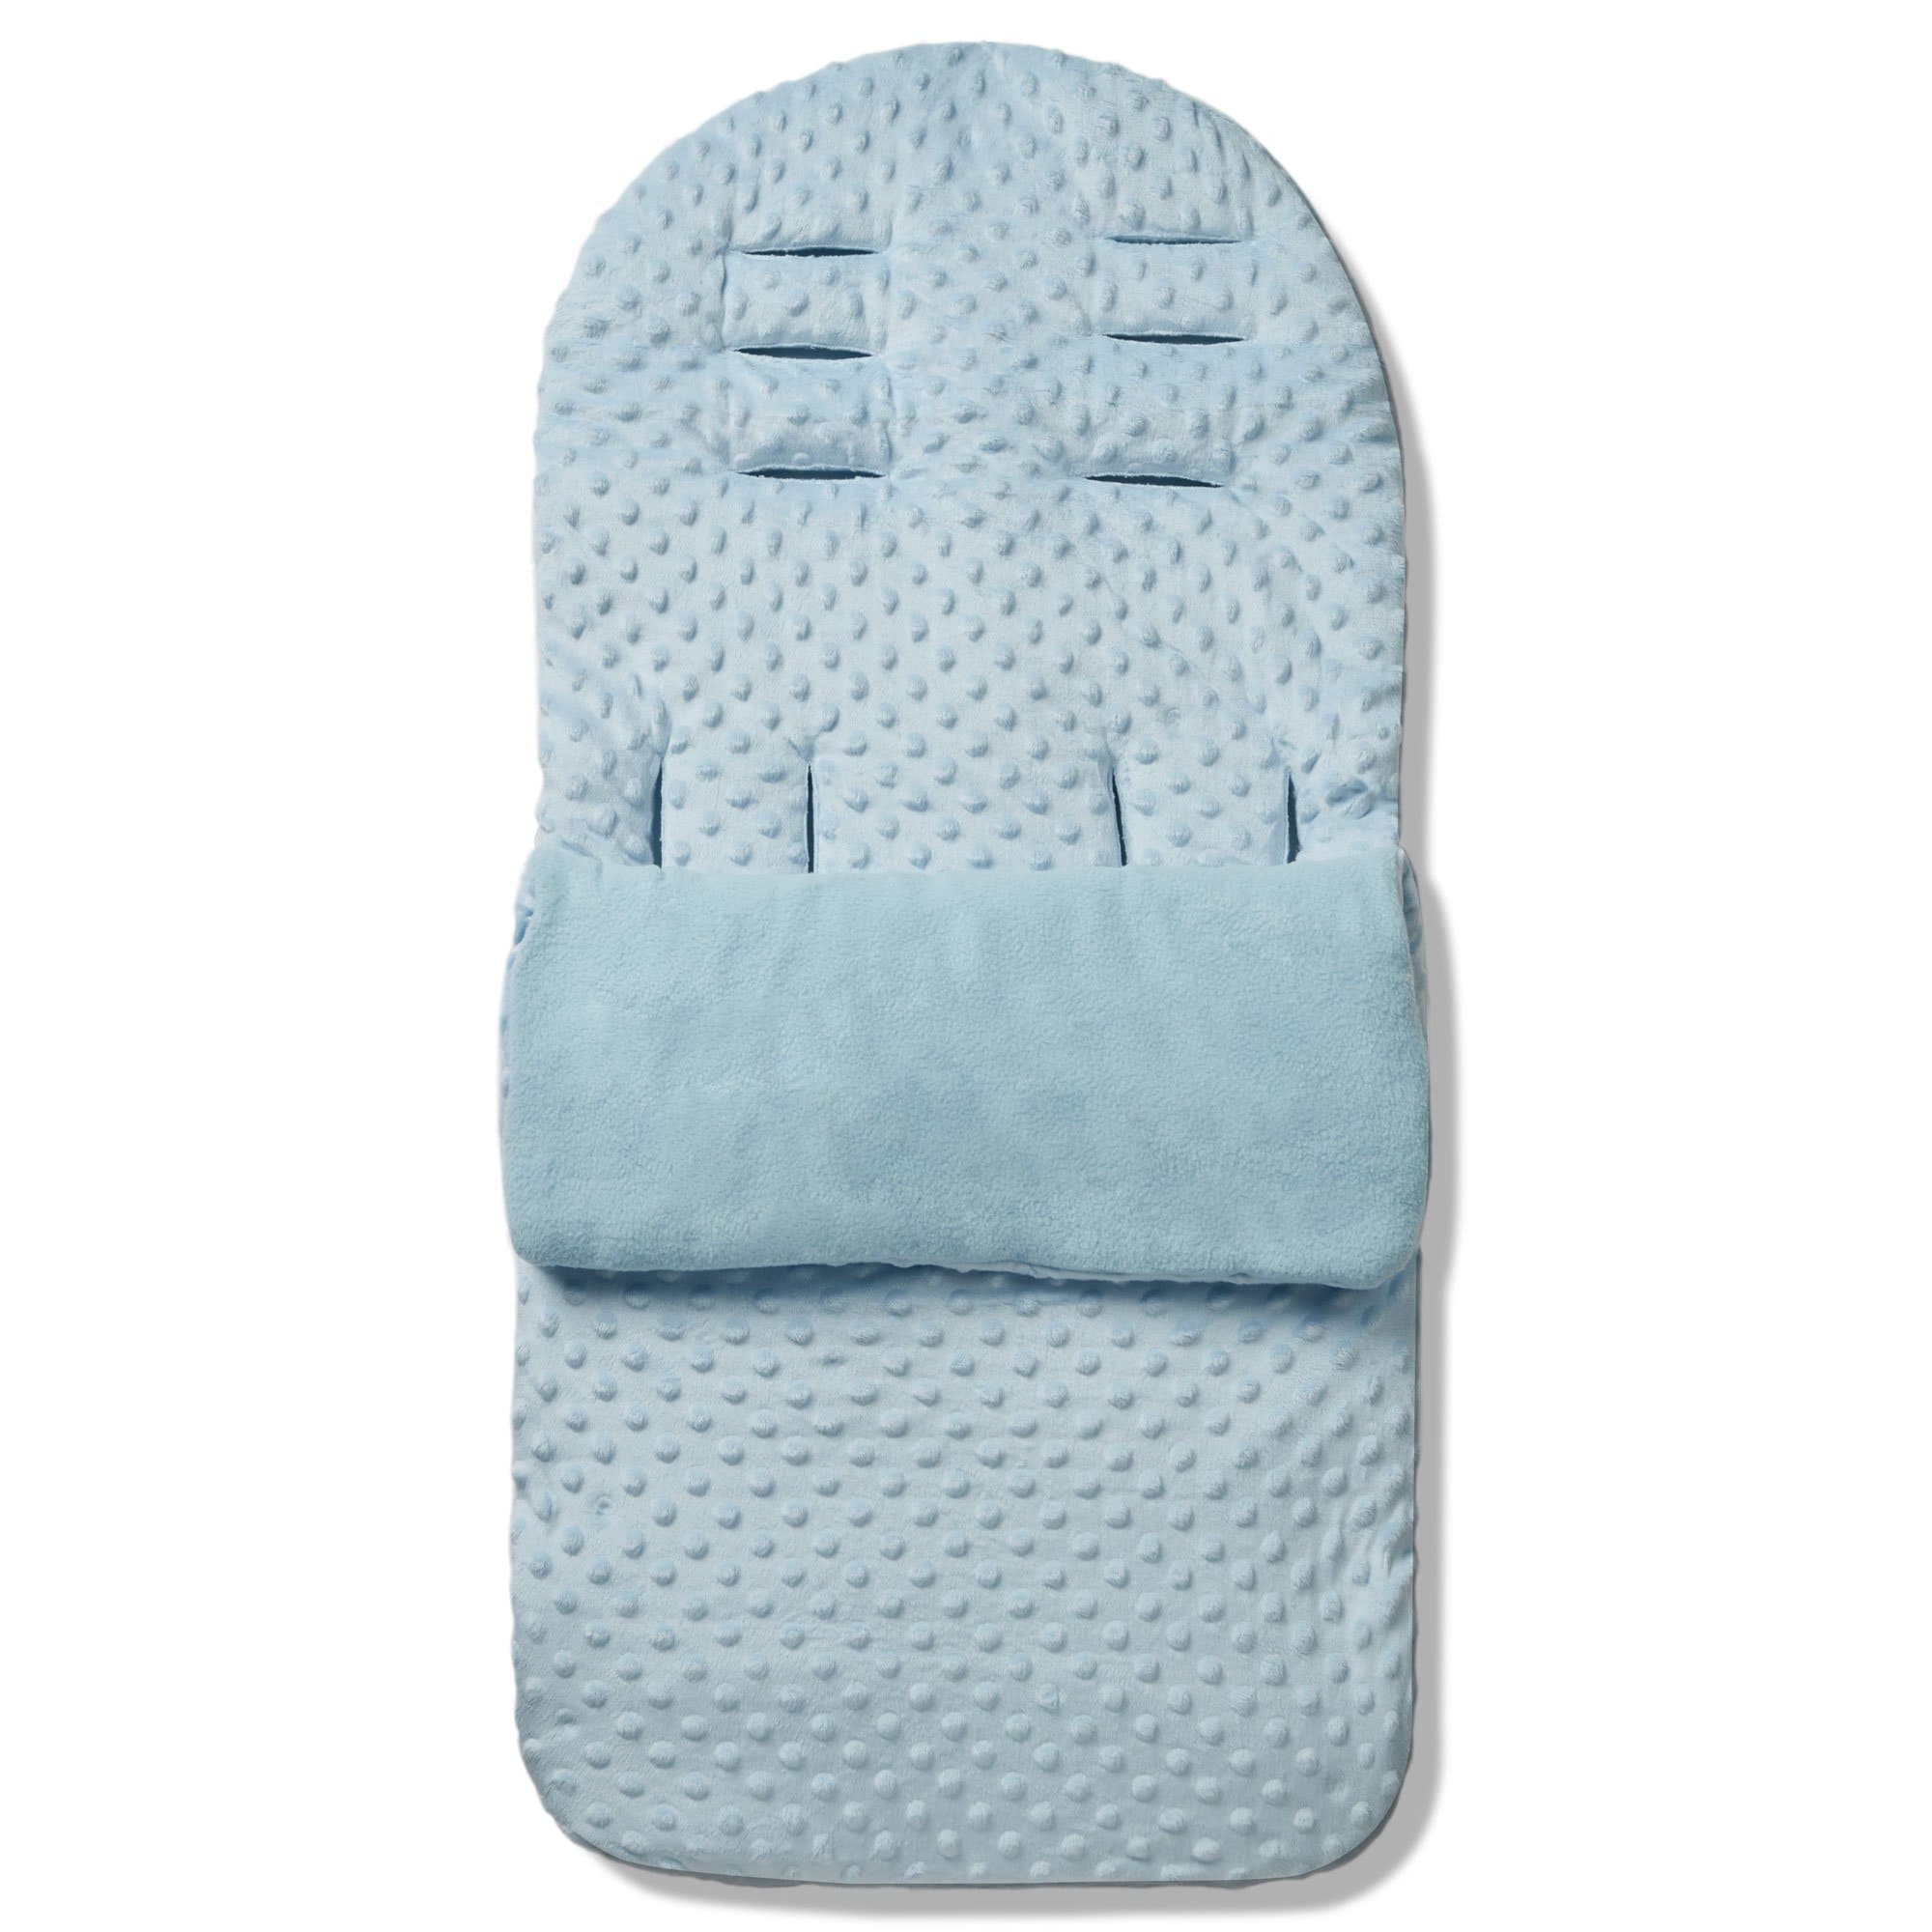 Dimple Footmuff / Cosy Toes Compatible with Combi - Blue / Fits All Models | For Your Little One